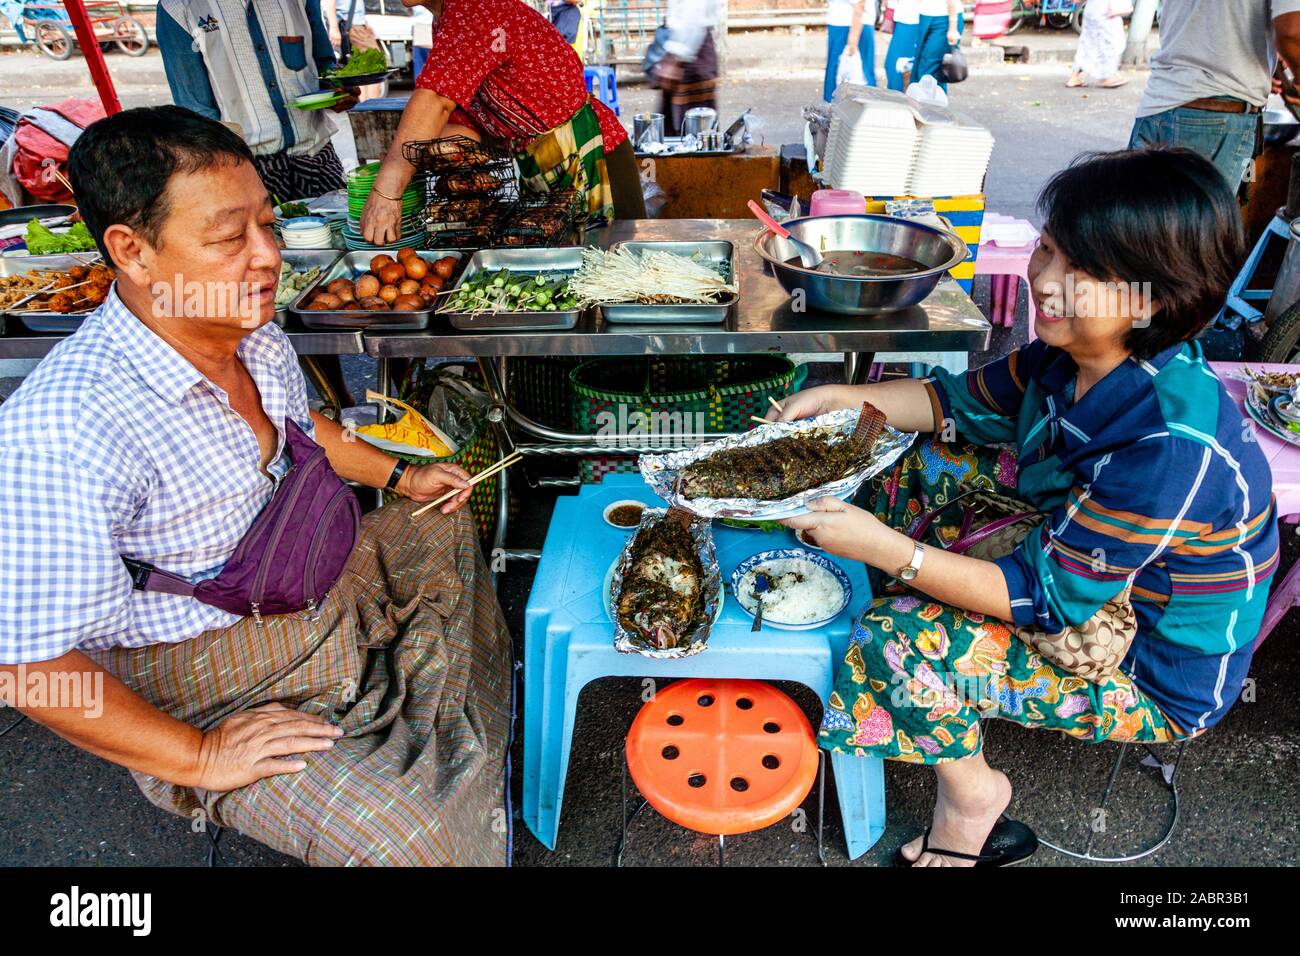 A Couple Eating A Fish Meal From A Street Food Stall, Yangon, Myanmar. Stock Photo